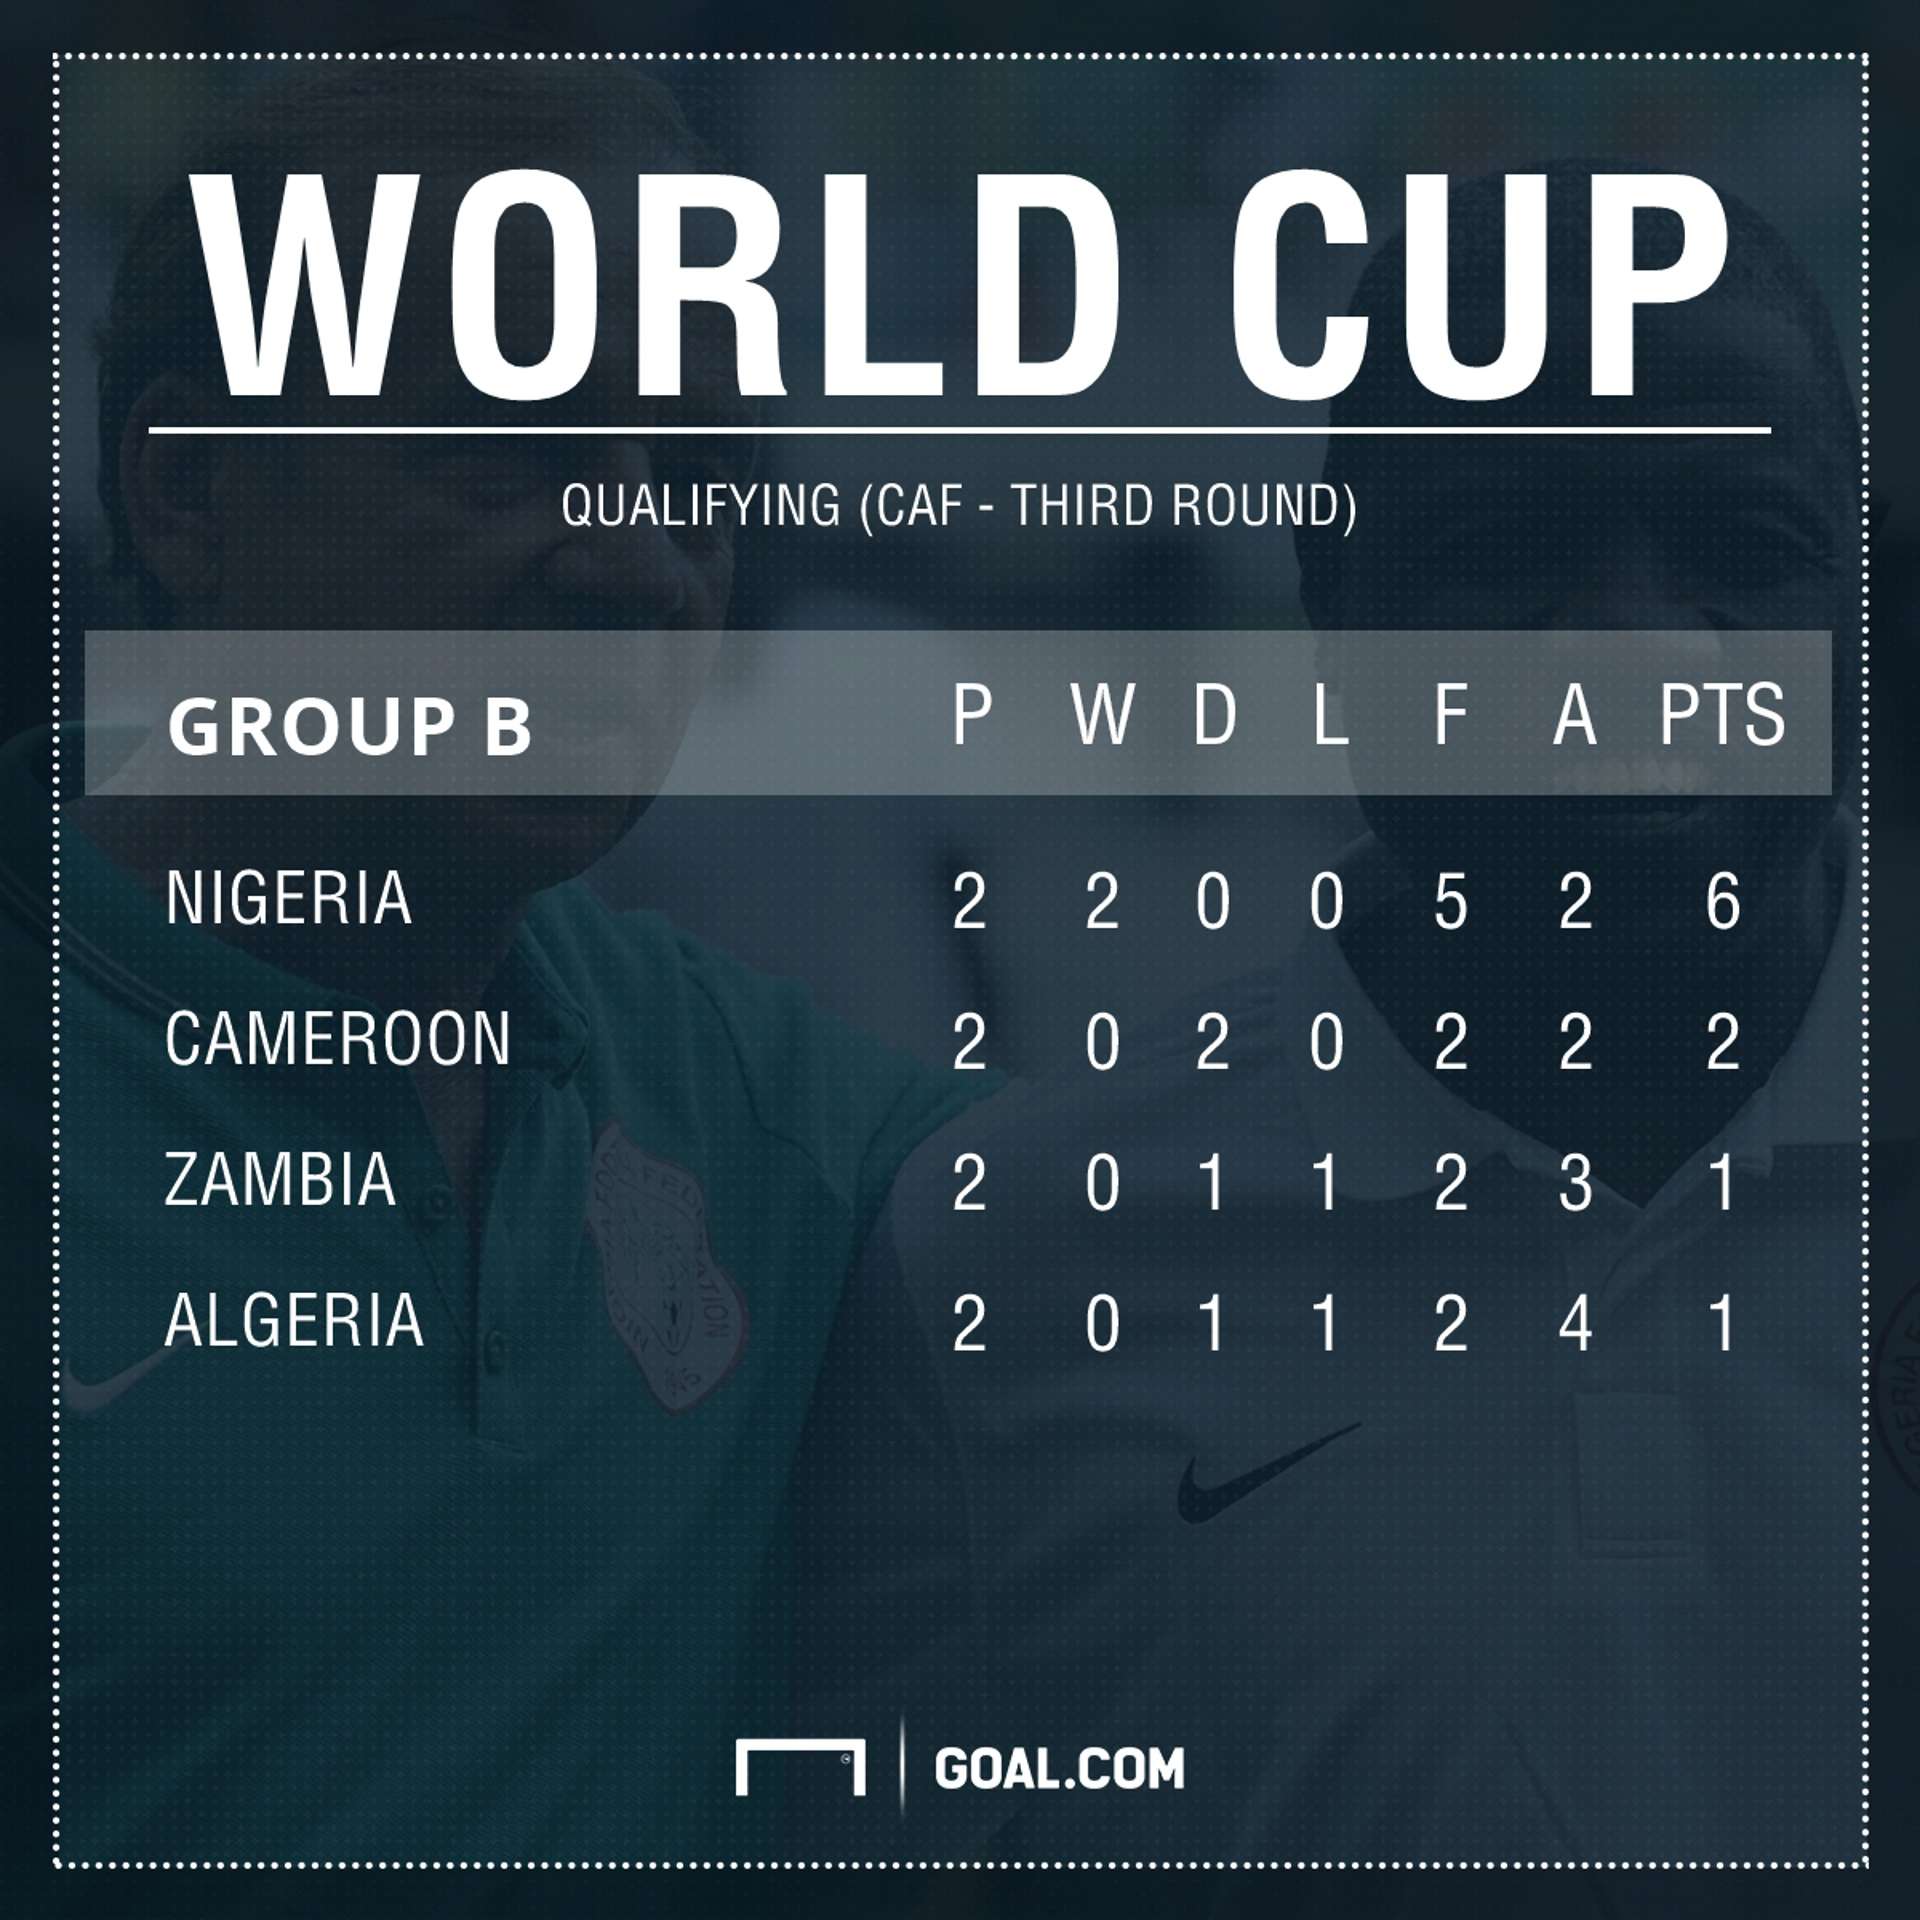 World Cup qualifying Caf Group B